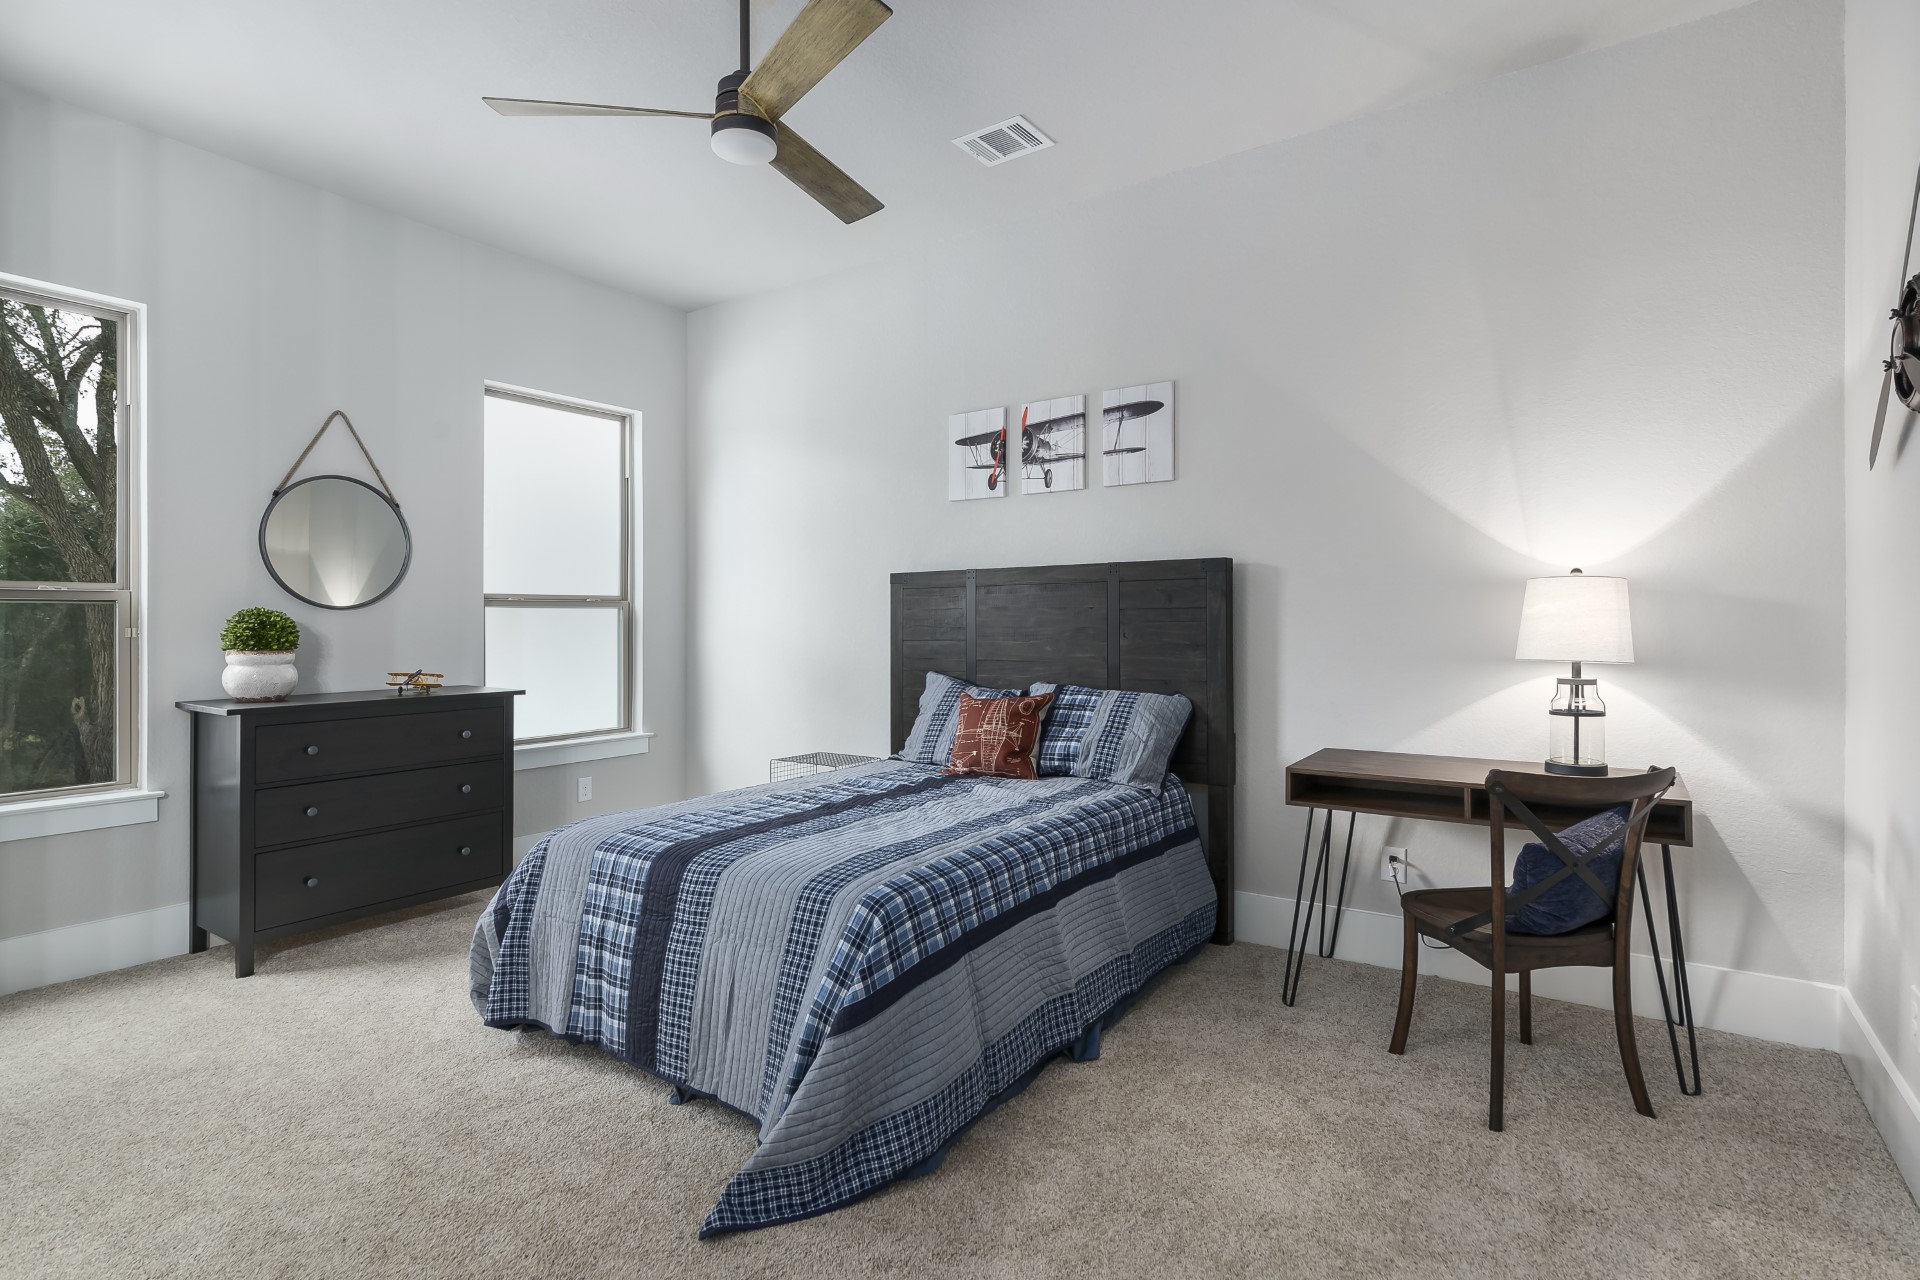 A front view of a boys bedroom within the Belle Oaks custom floor plan from JLP Builders